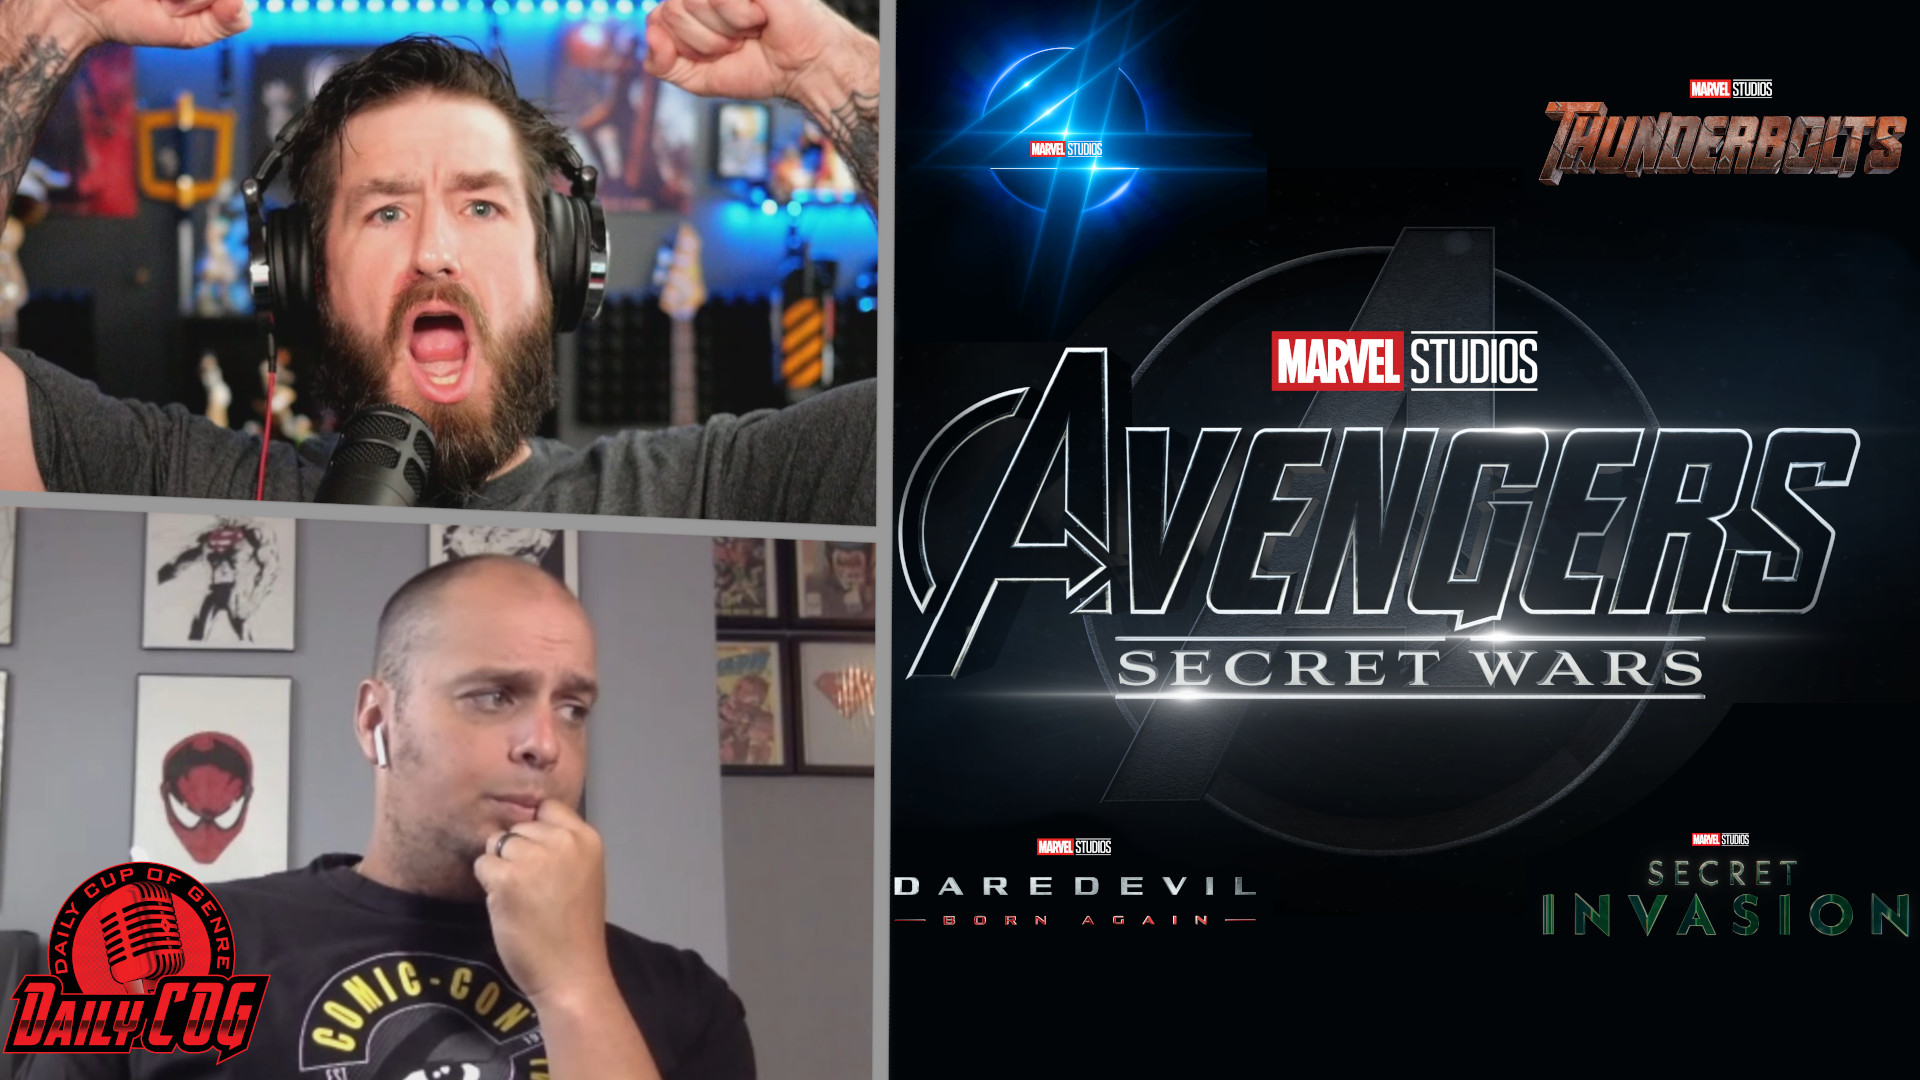 Title cards for MCU Phase 5 films and MCU Phase 6 films next to images of podcast hosts Kyle and Mike